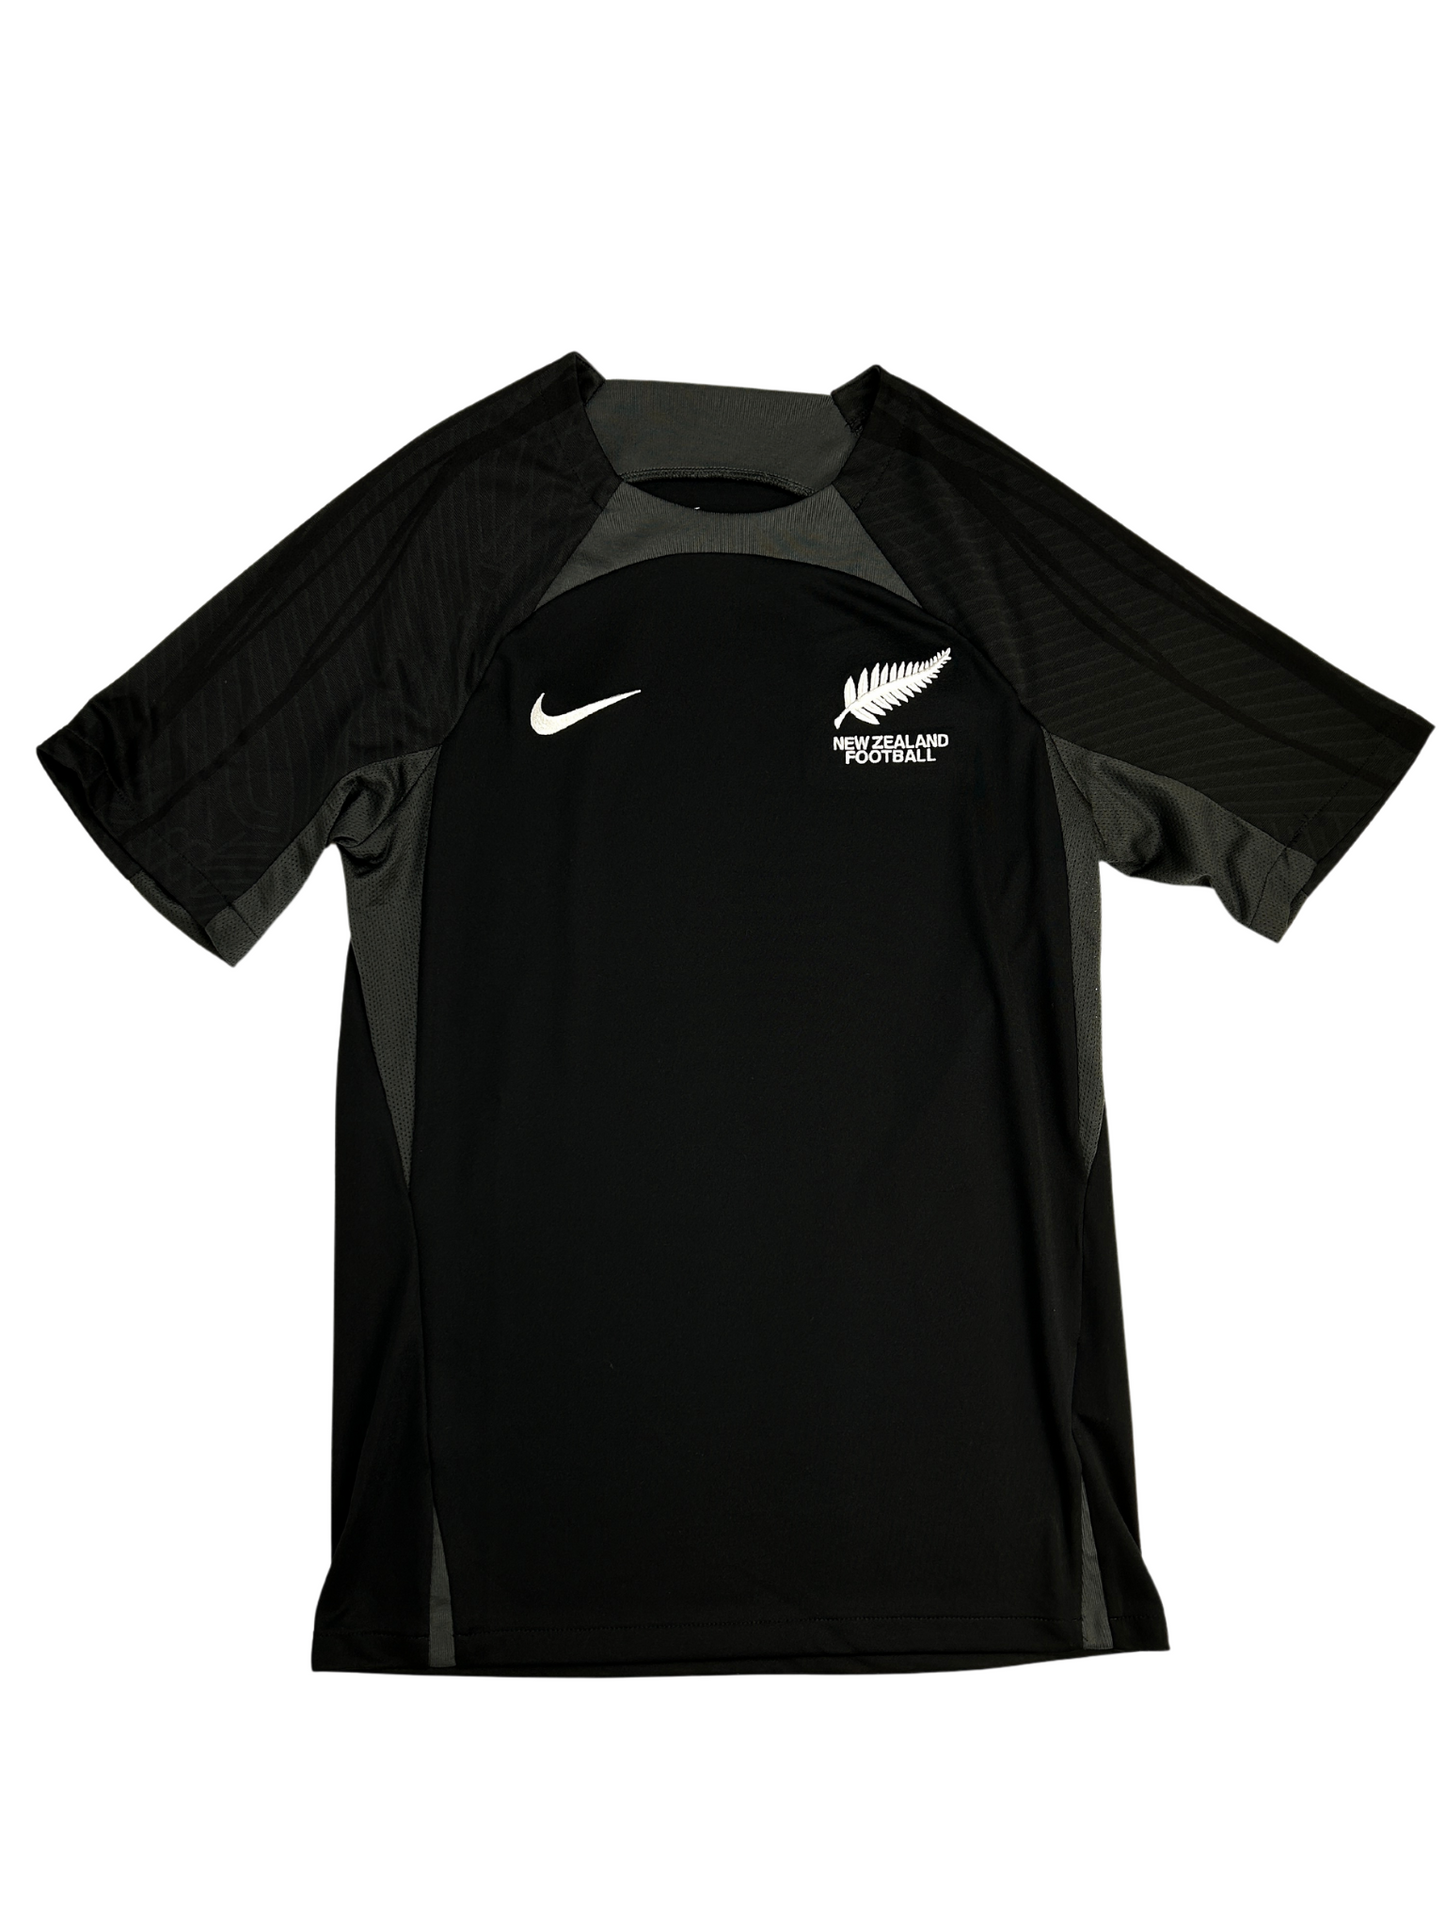 New Zealand Player Issue Training Kit S